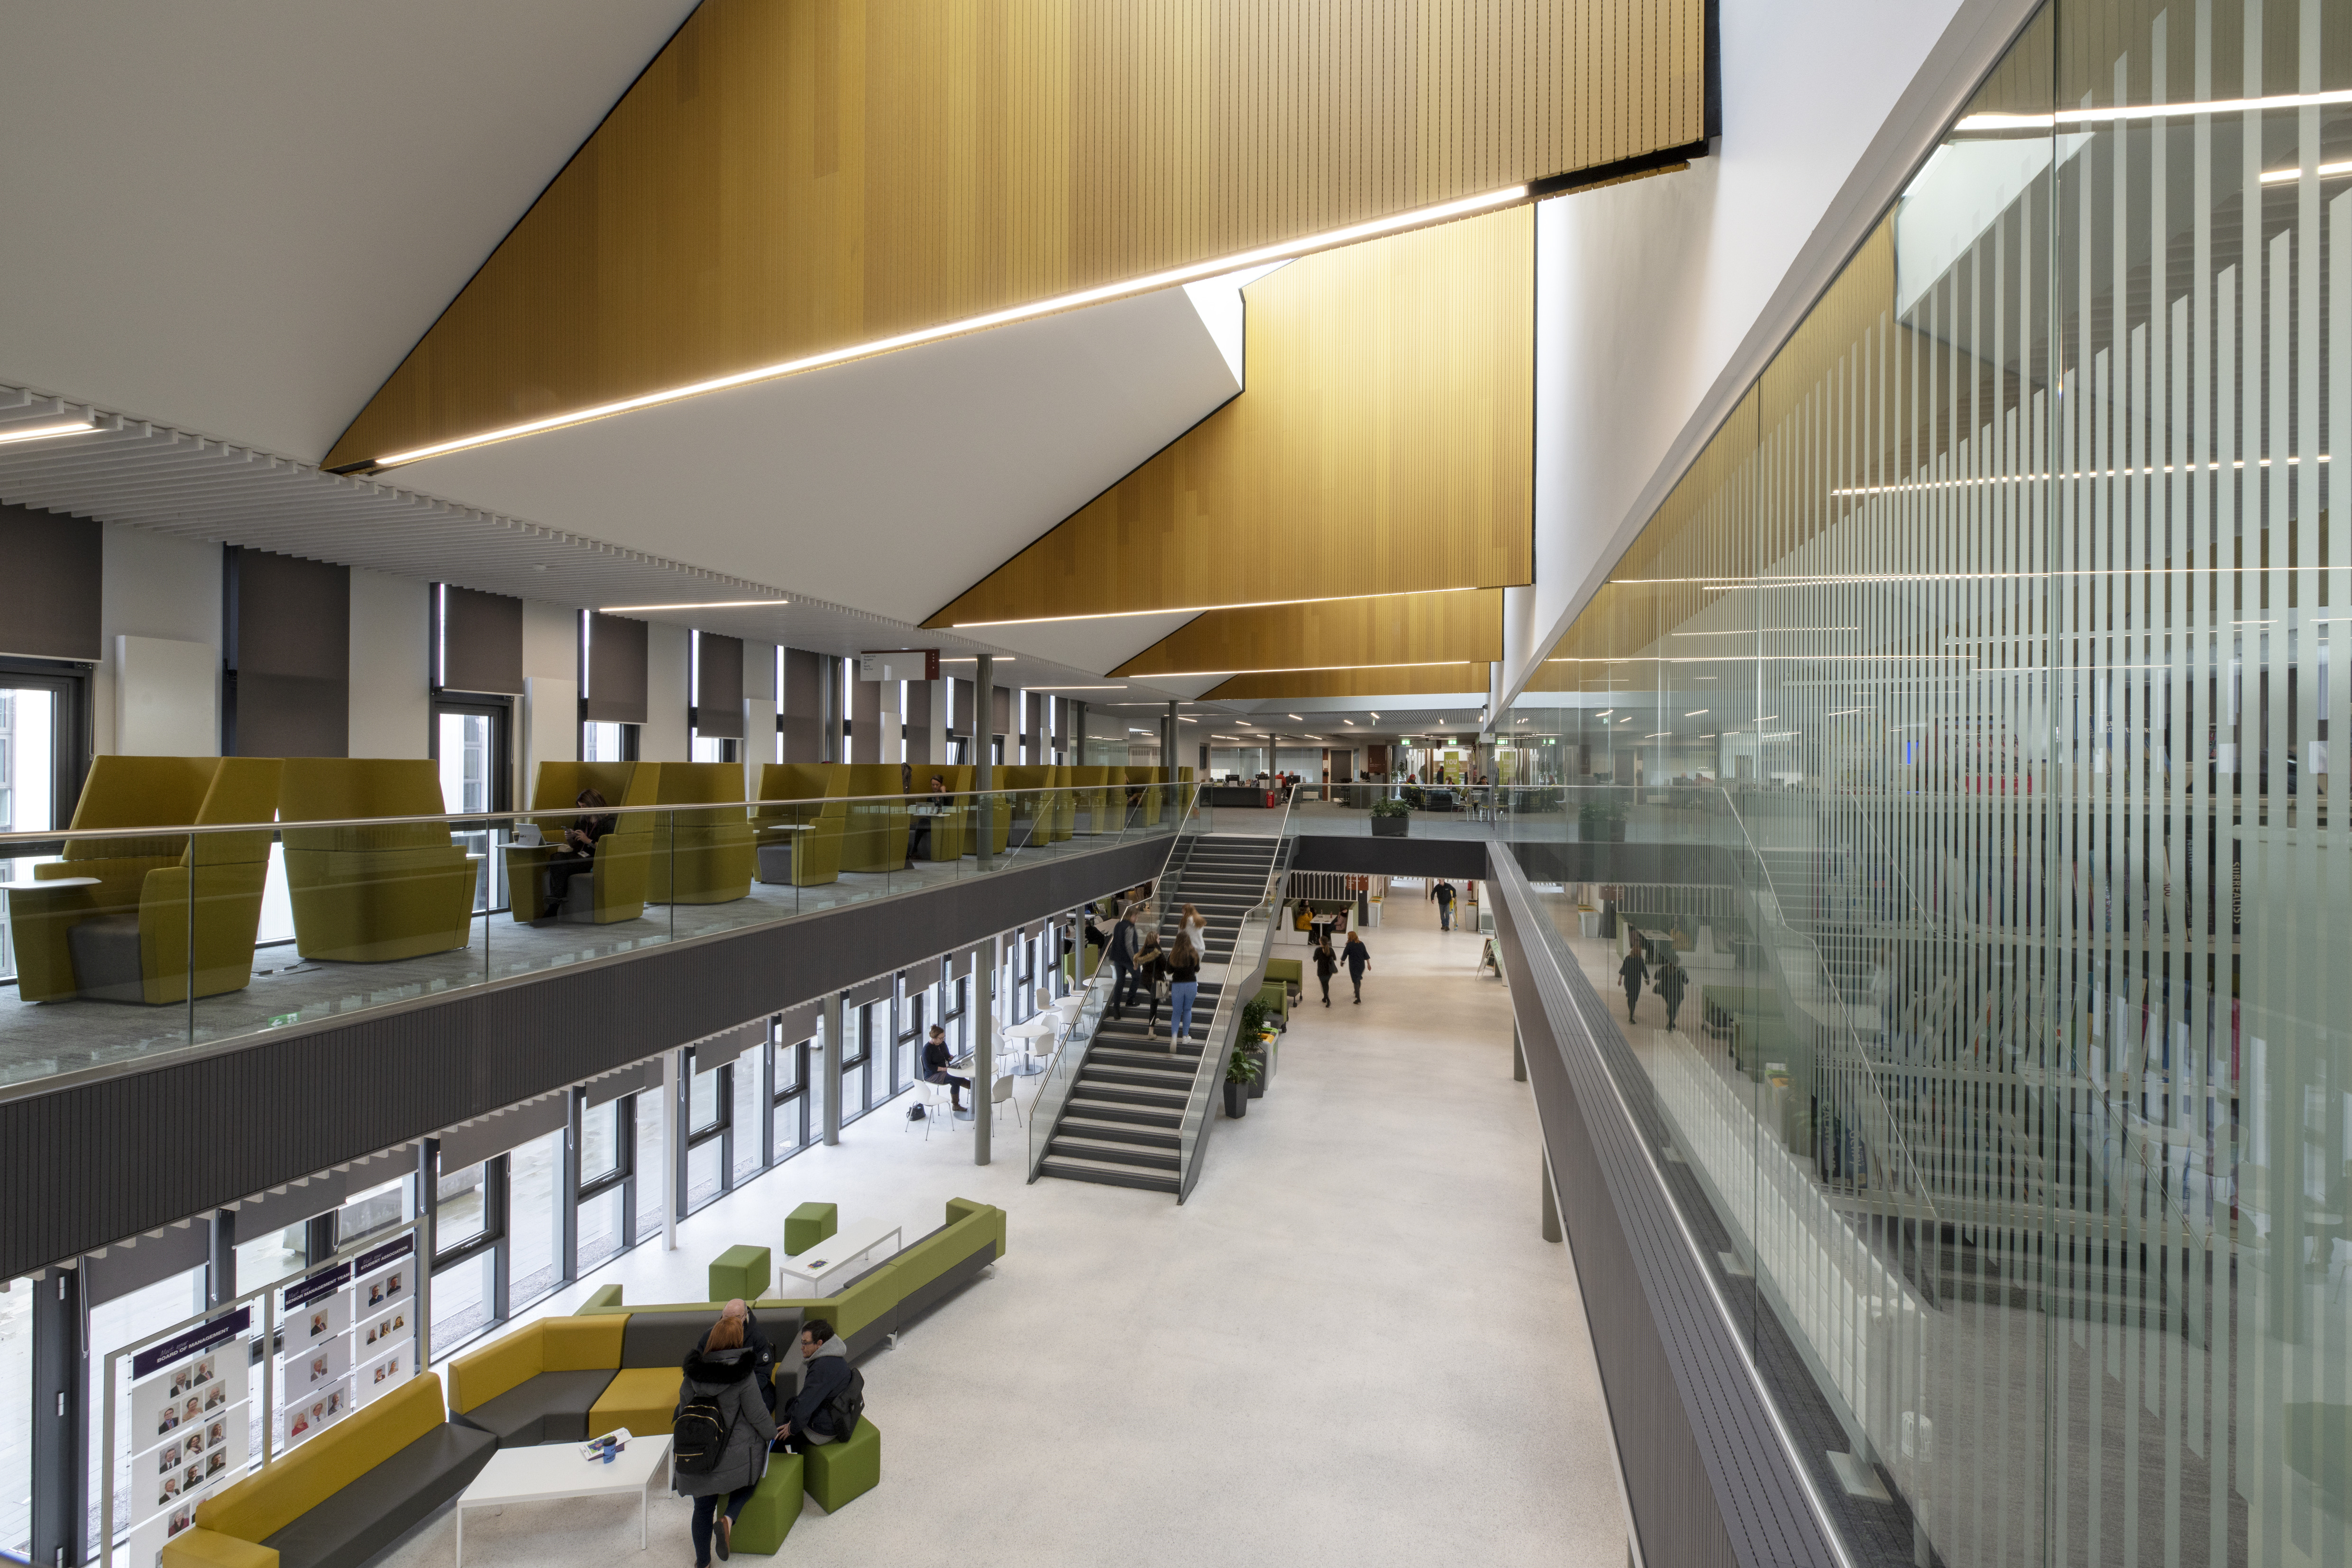 Andrew Doolan Award preview: Forth Valley College - Falkirk Campus